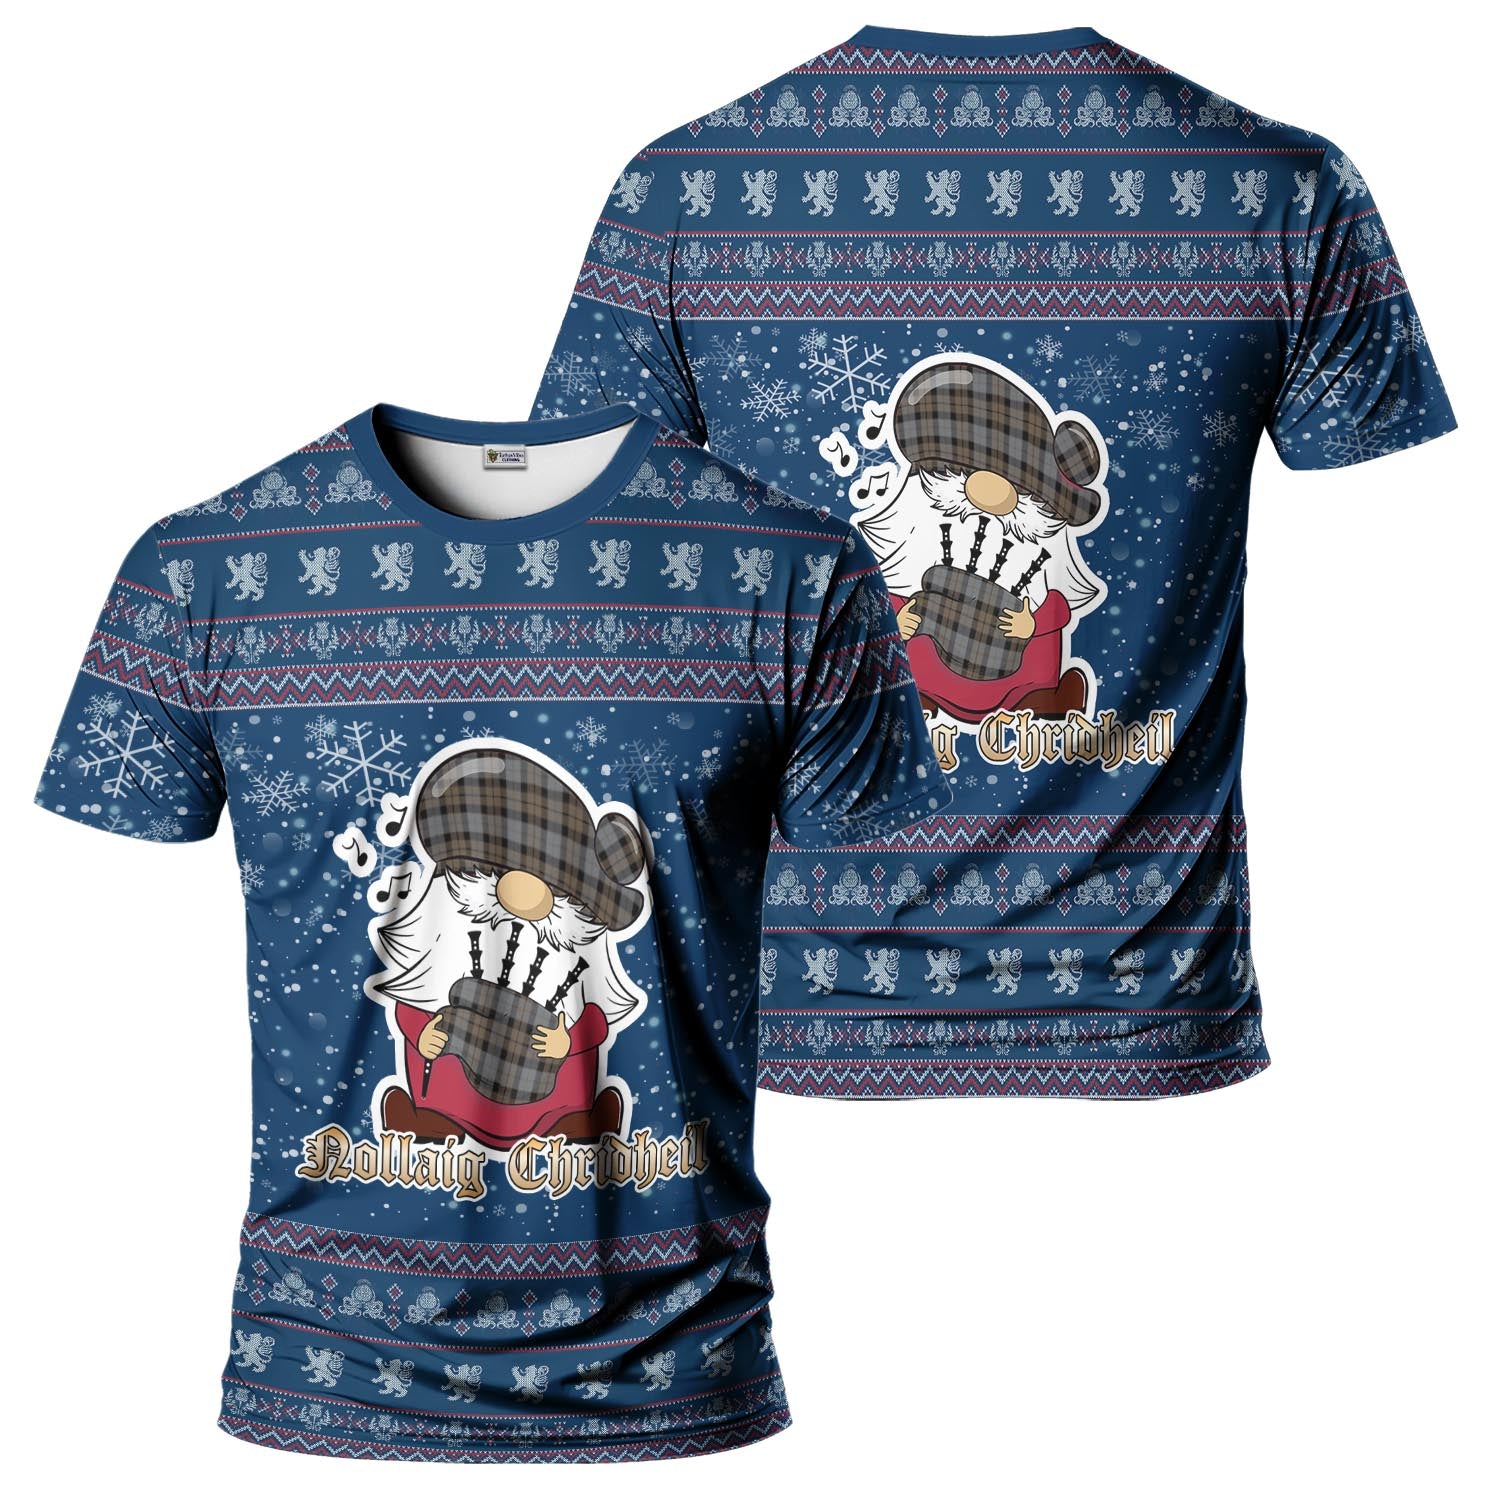 MacKay Weathered Clan Christmas Family T-Shirt with Funny Gnome Playing Bagpipes Kid's Shirt Blue - Tartanvibesclothing